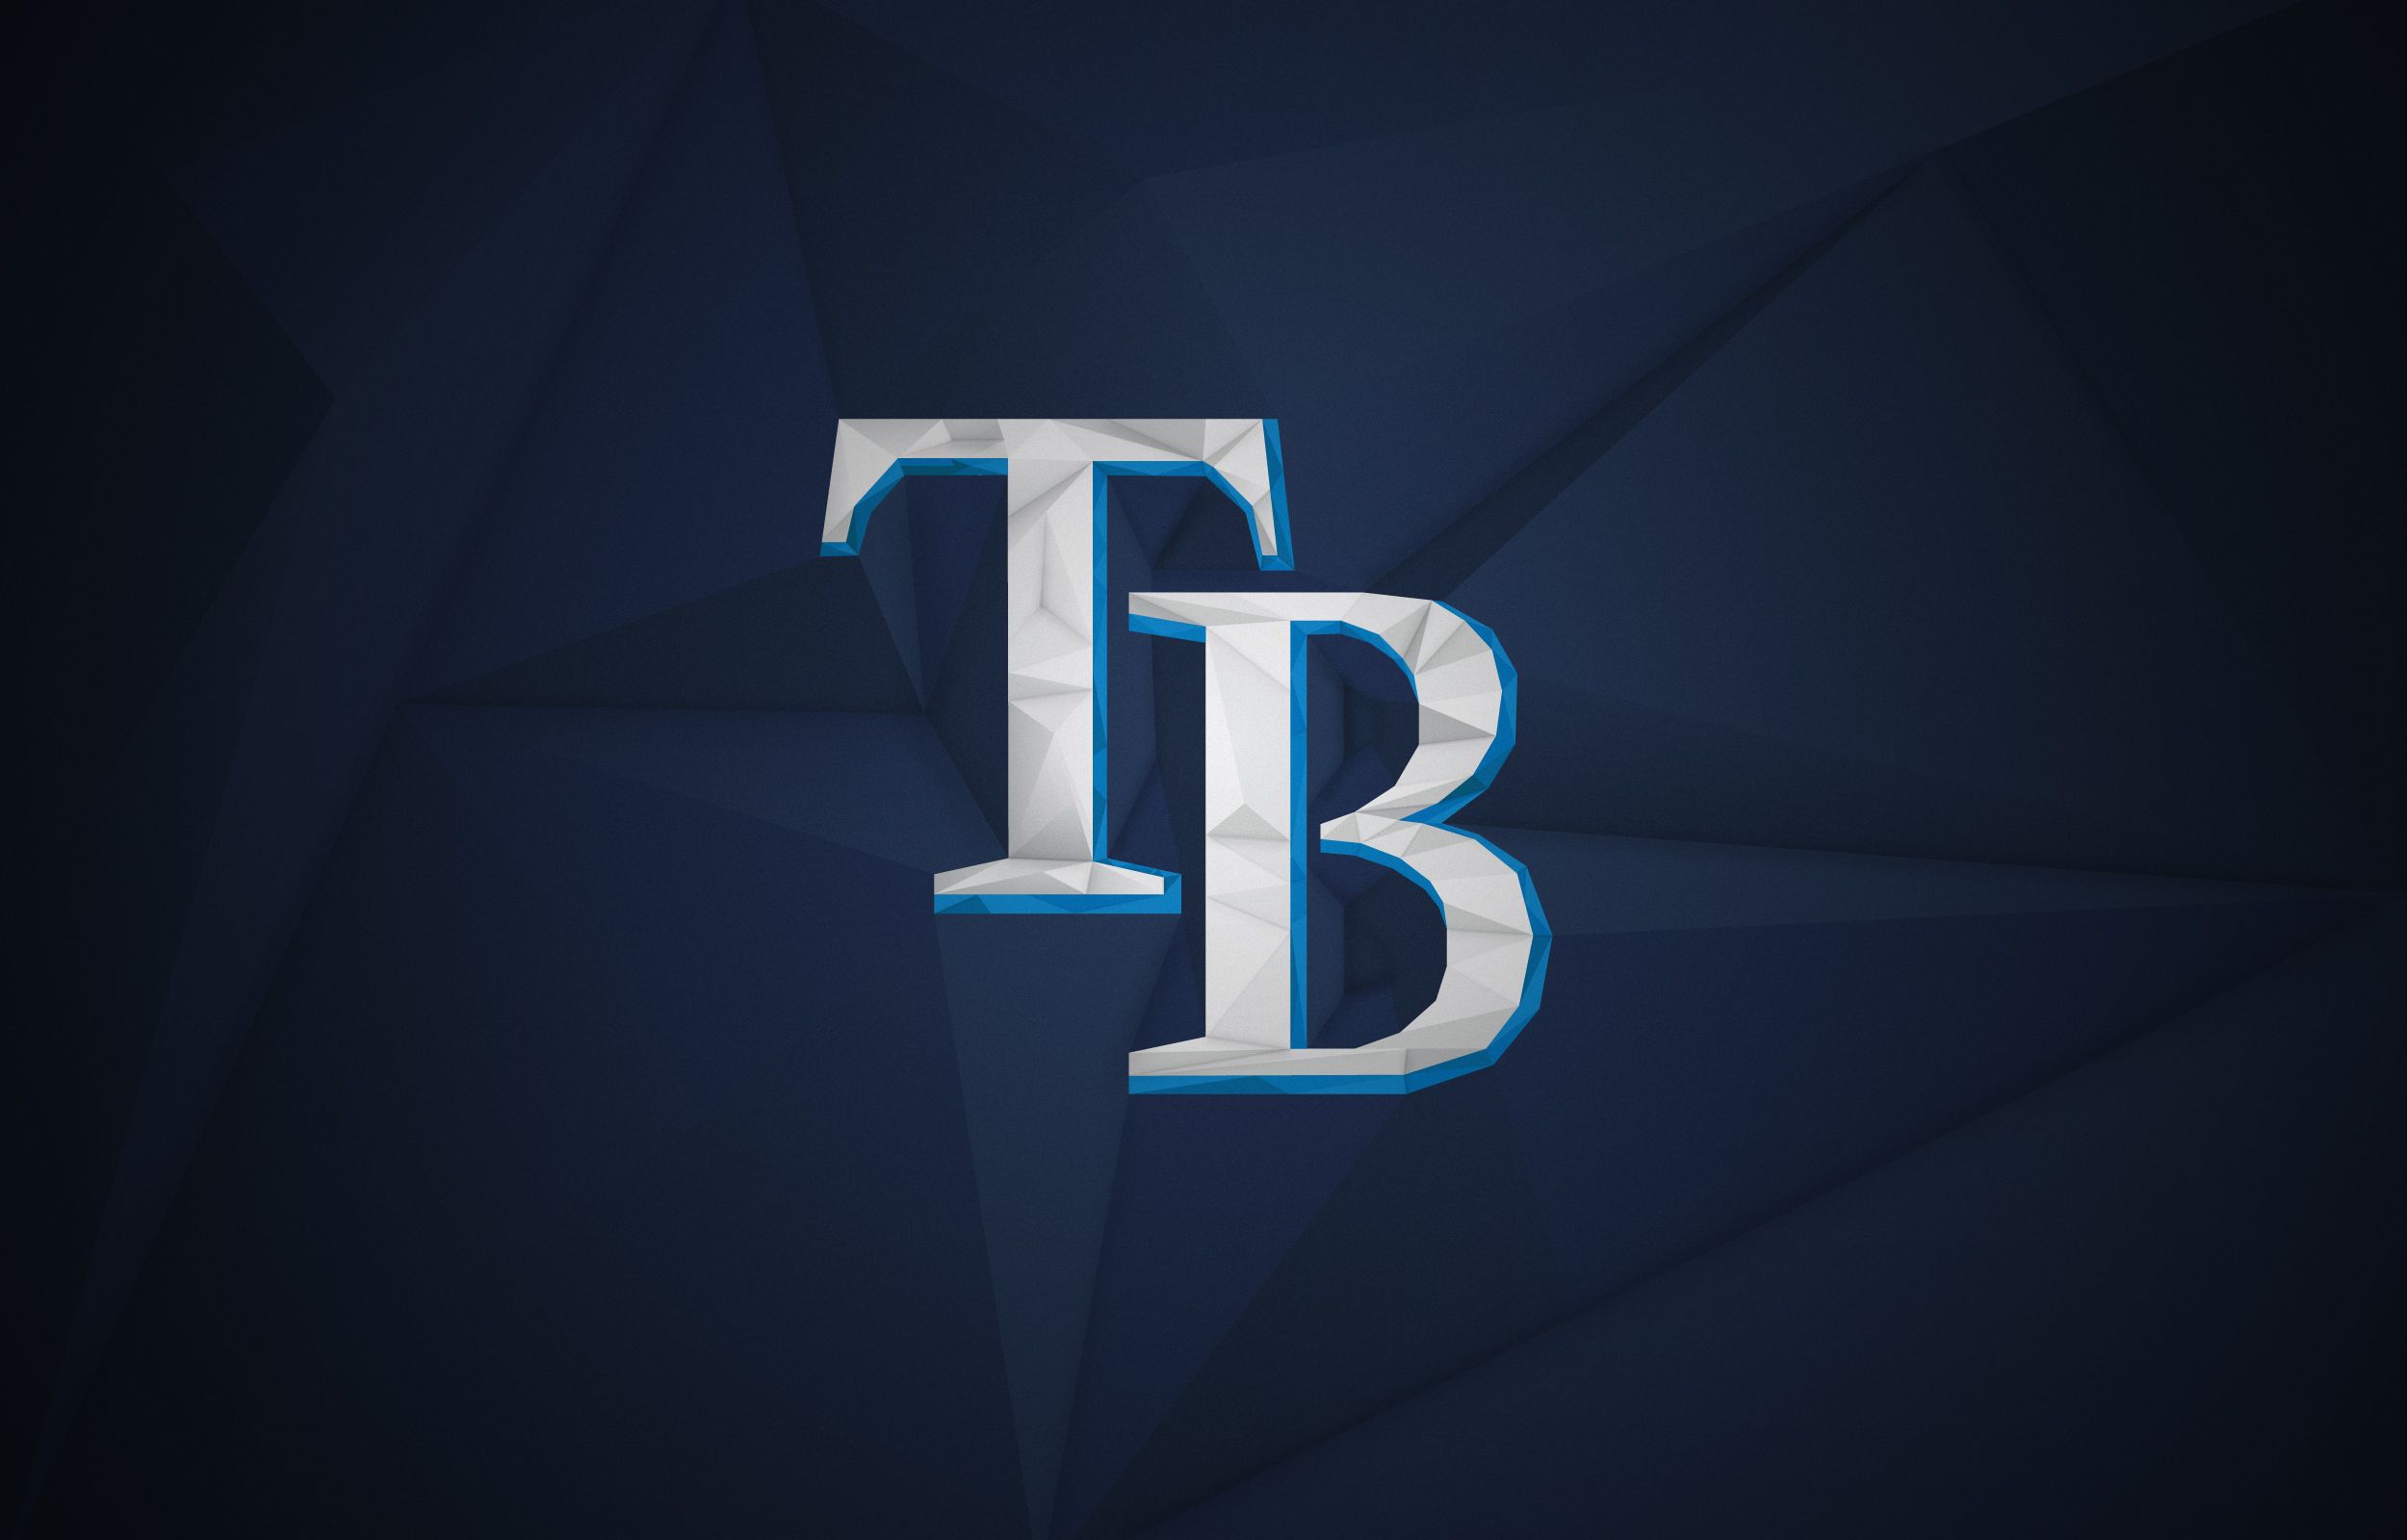 Tampa Bay Rays Wallpapers Images Photos Pictures Backgrounds